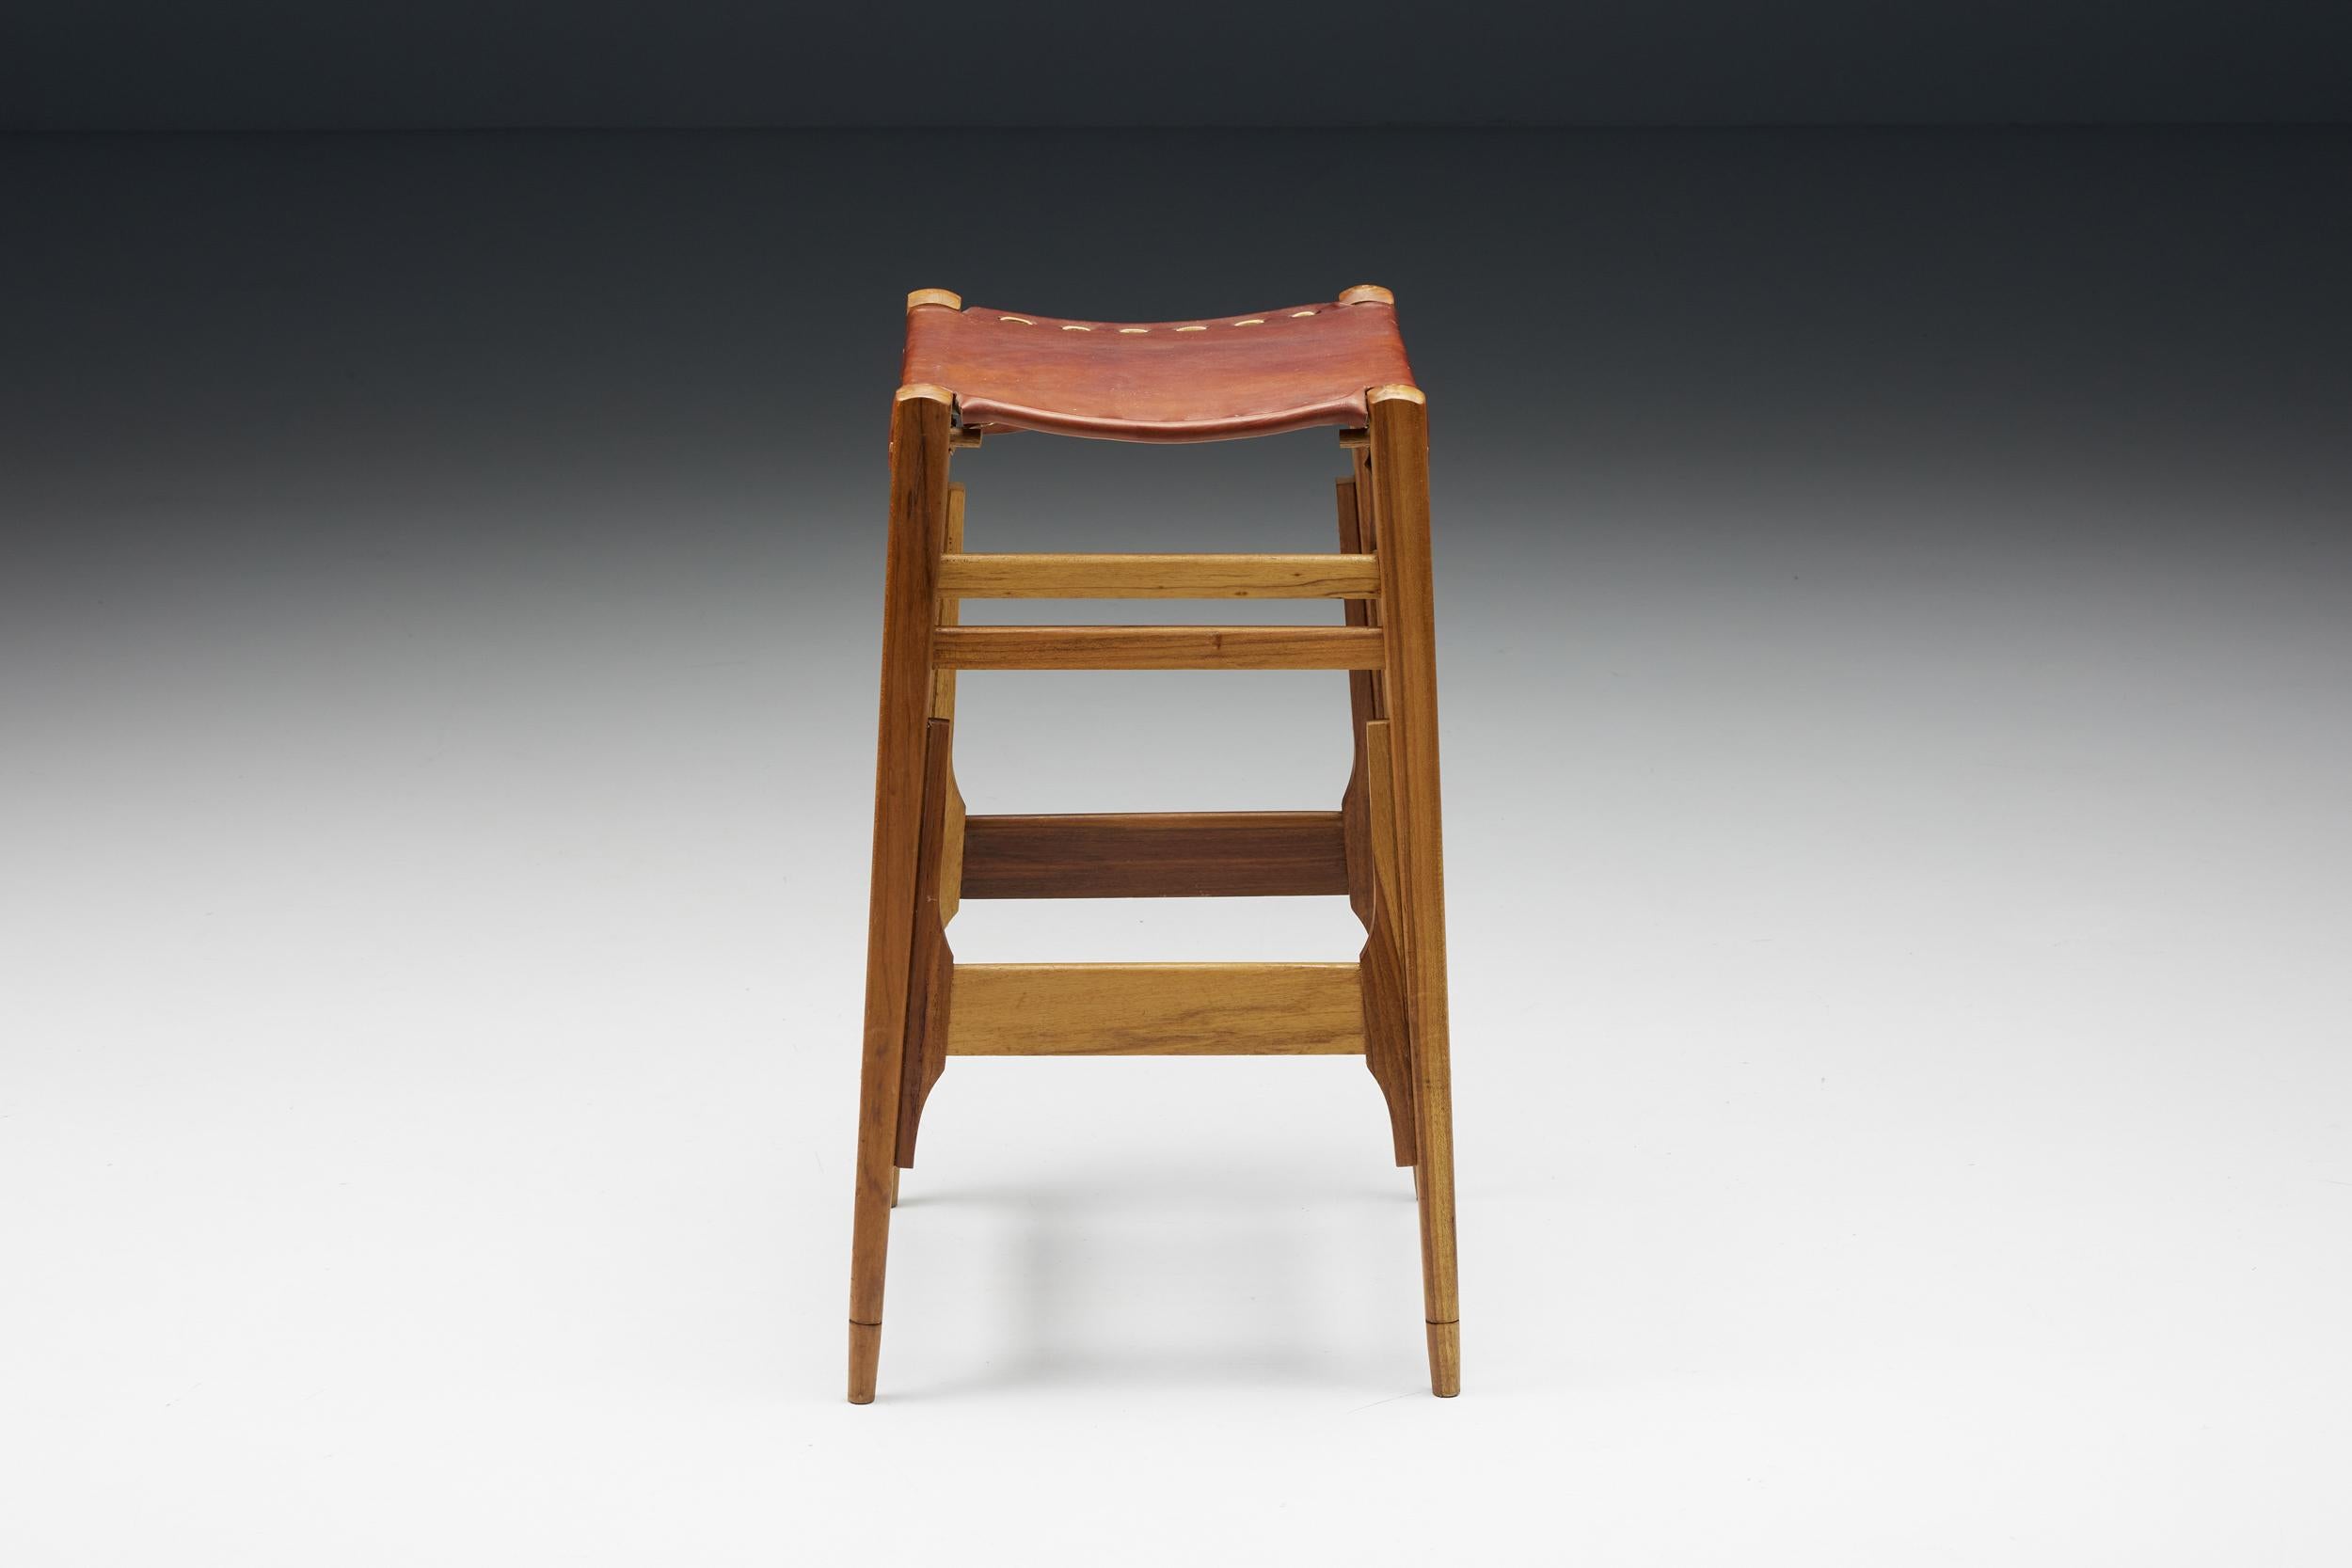 Mid-20th Century Werner Biermann for Arte Sano Bar Stools, Hand-Tanned Leather, Colombia, 1960's